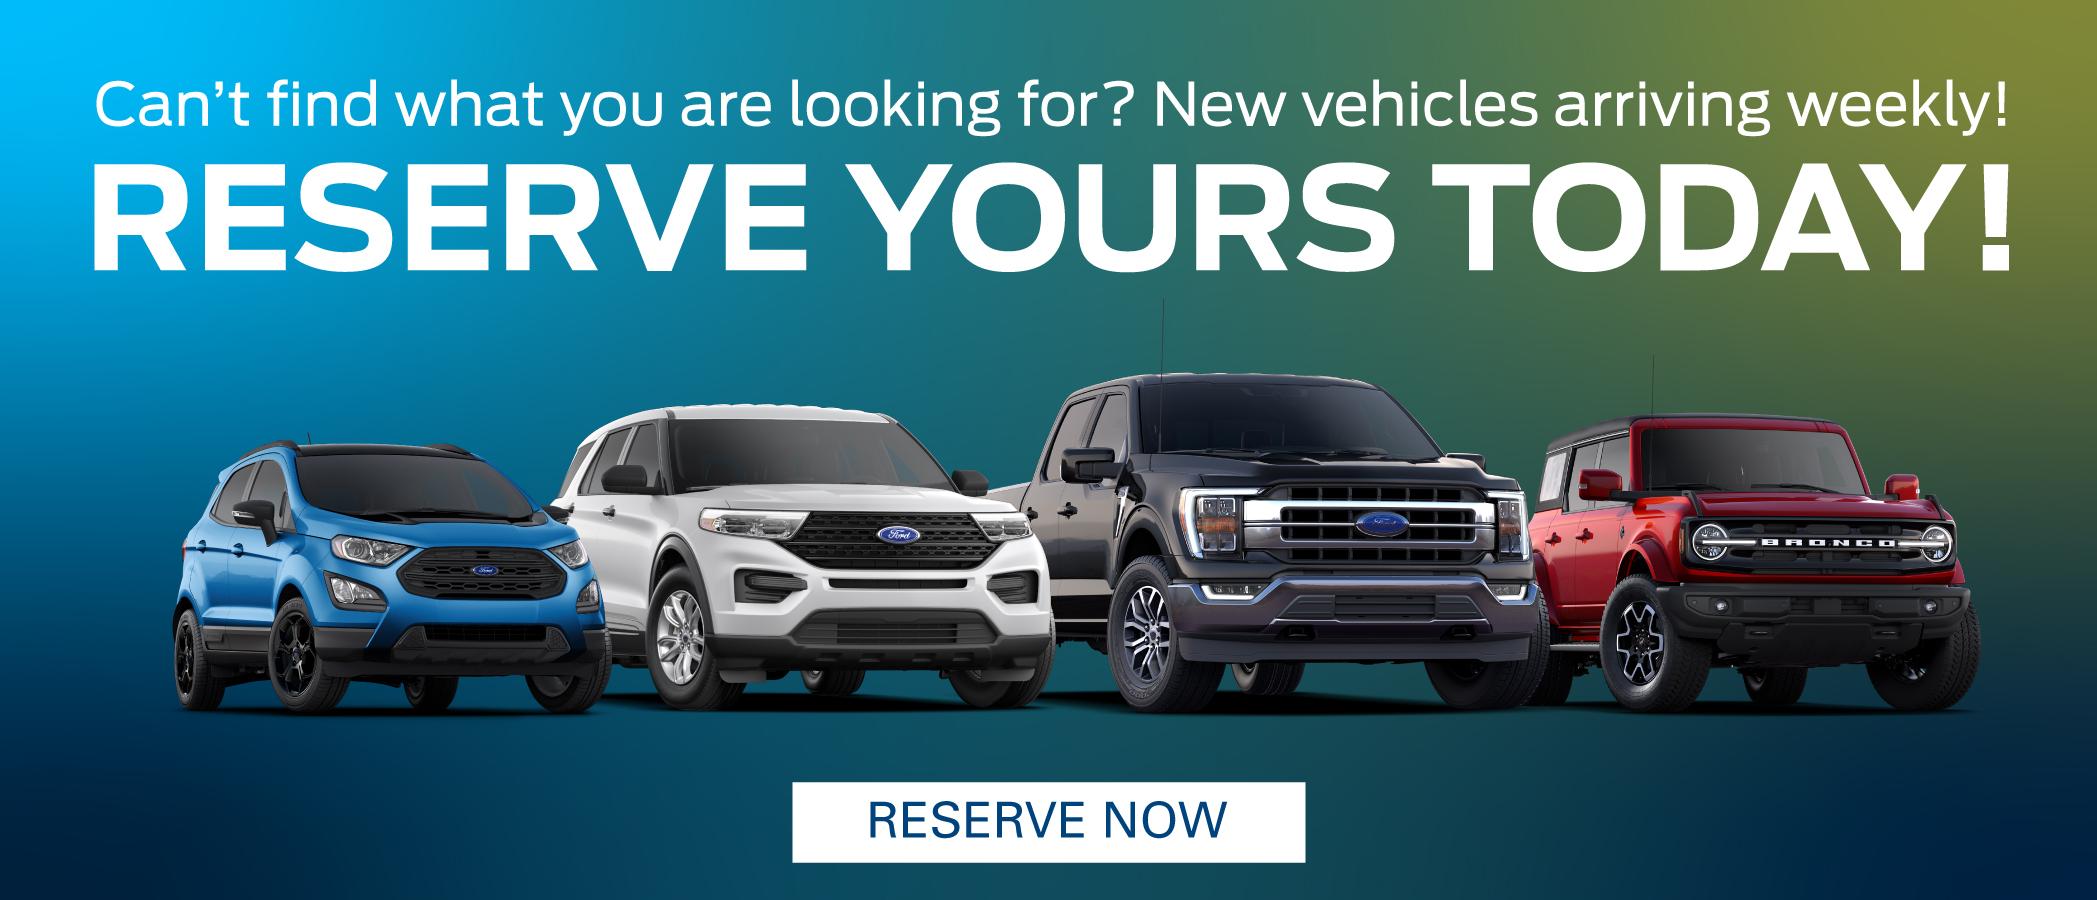 Reserve yours today Ford